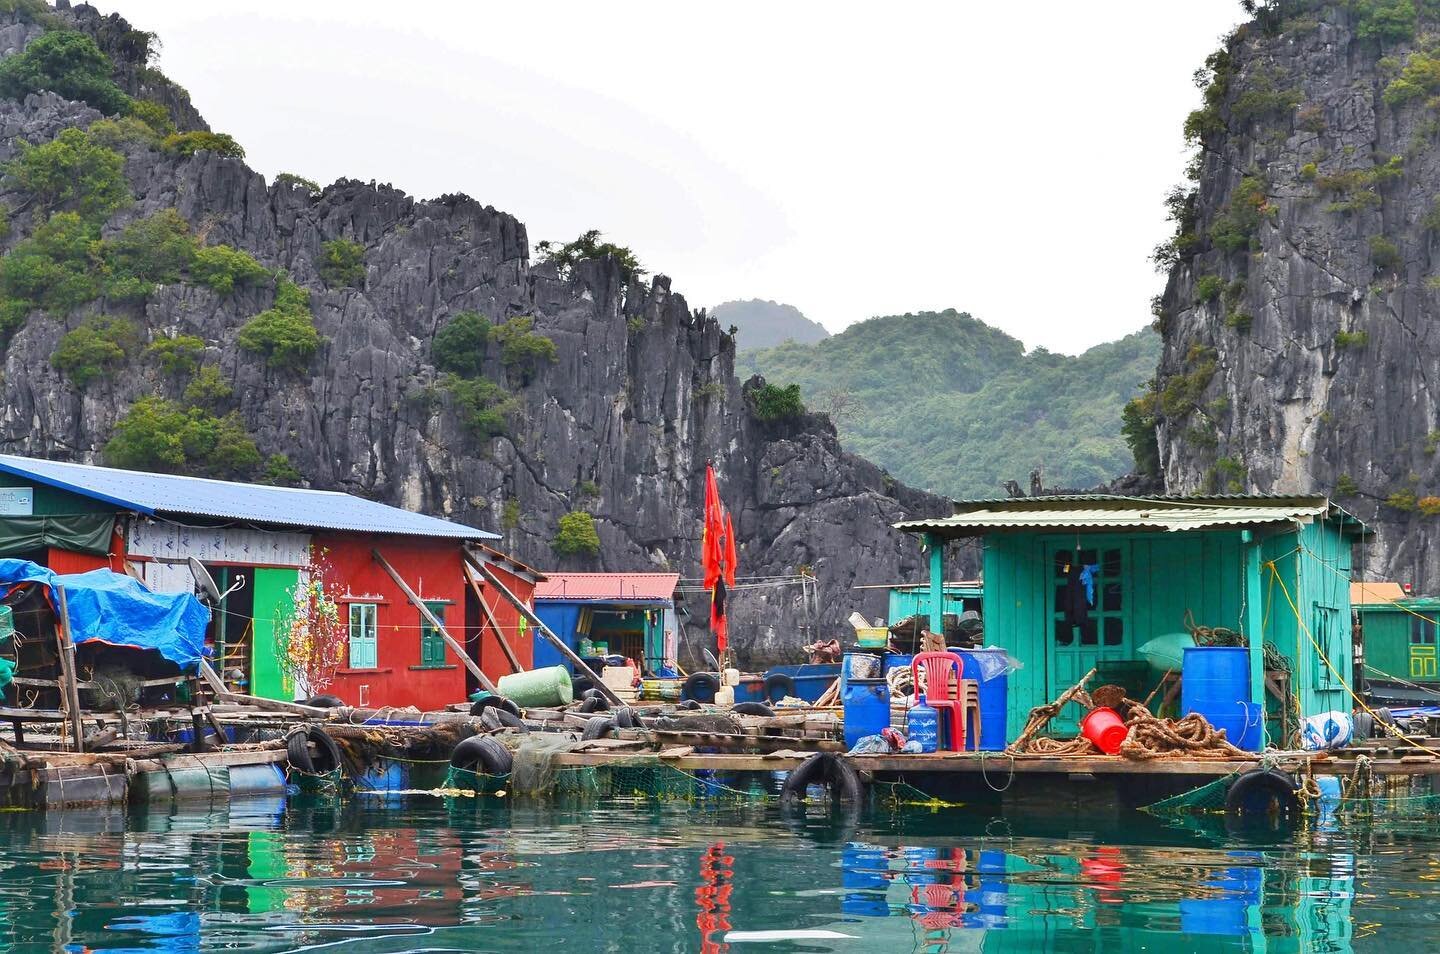 Floating rainbows make up Vietnam's fishing villages around Catba Island. The dramatic landscapes behind the small, colorful homes make an excellent spot for exploration. 

Our first full day on the island we hopped on a boat tour led by a local isla